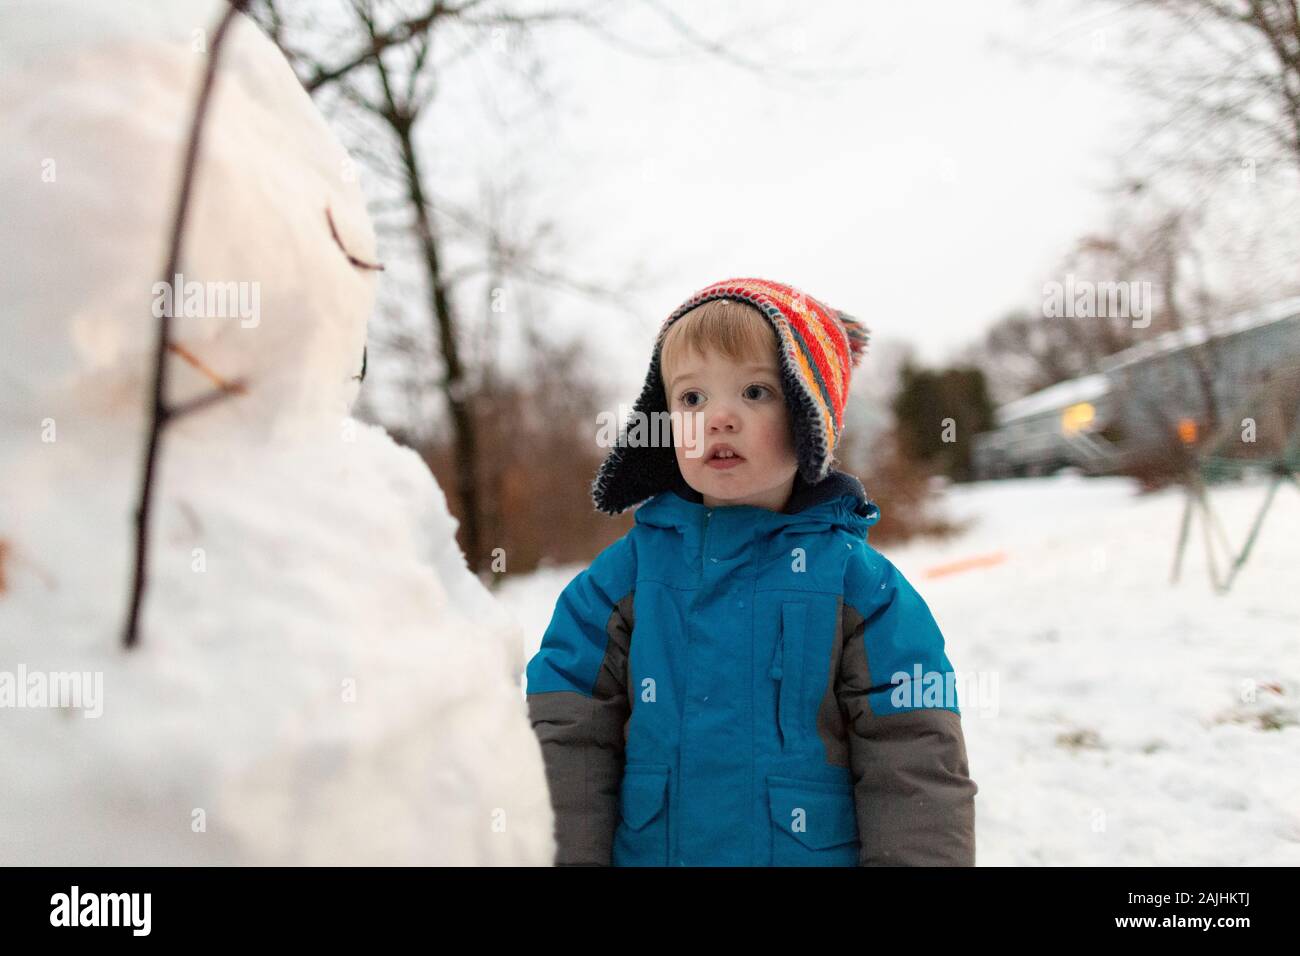 Mid shot of toddler boy wearing knit hat standing looking at snowman Stock Photo